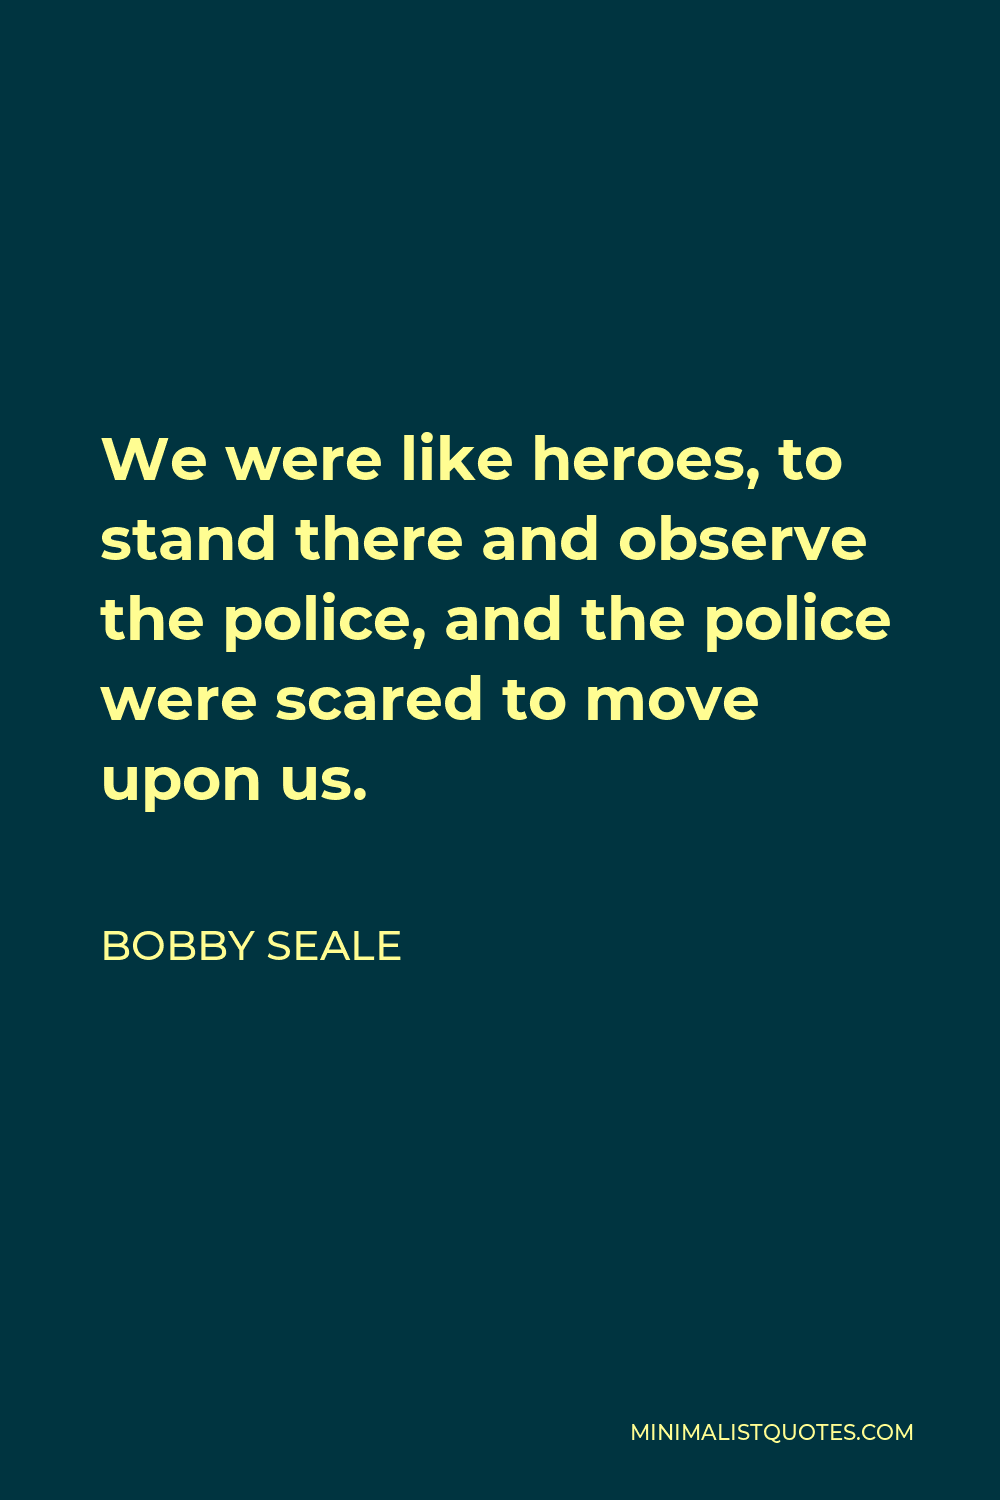 Bobby Seale Quote - We were like heroes, to stand there and observe the police, and the police were scared to move upon us.